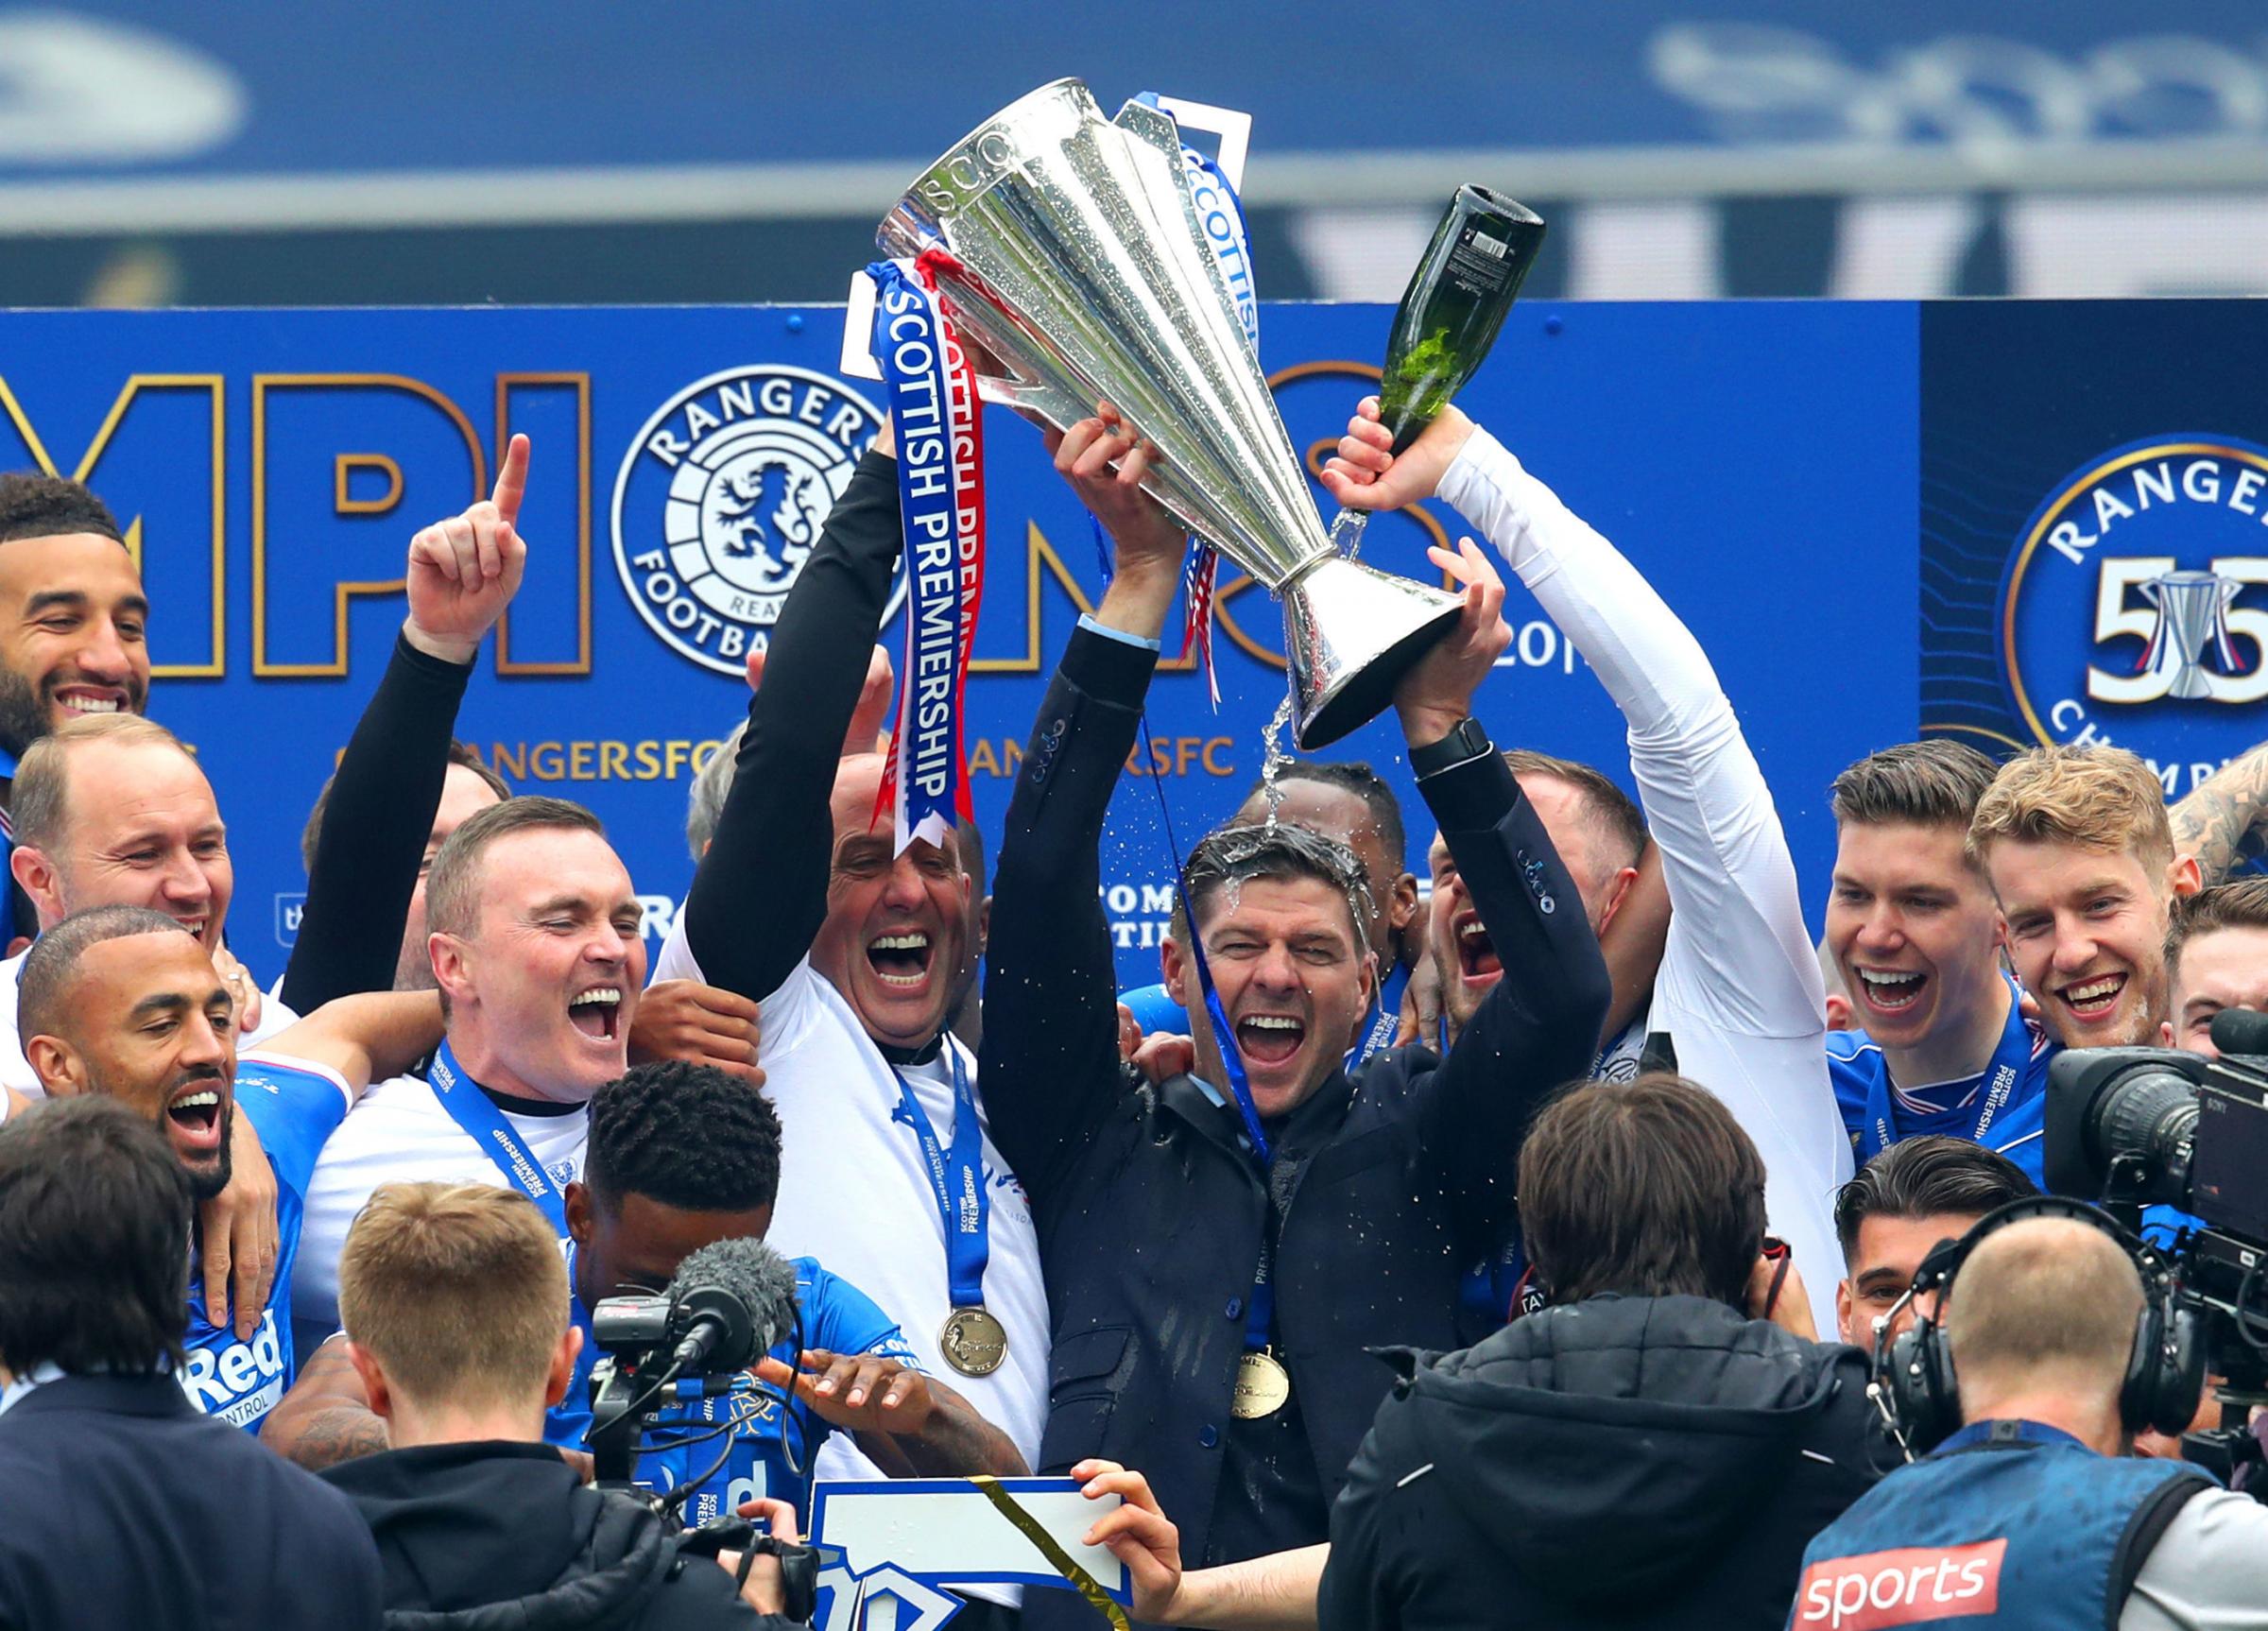 Rangers legend savours 55th title win after 'sad days' at Ibrox